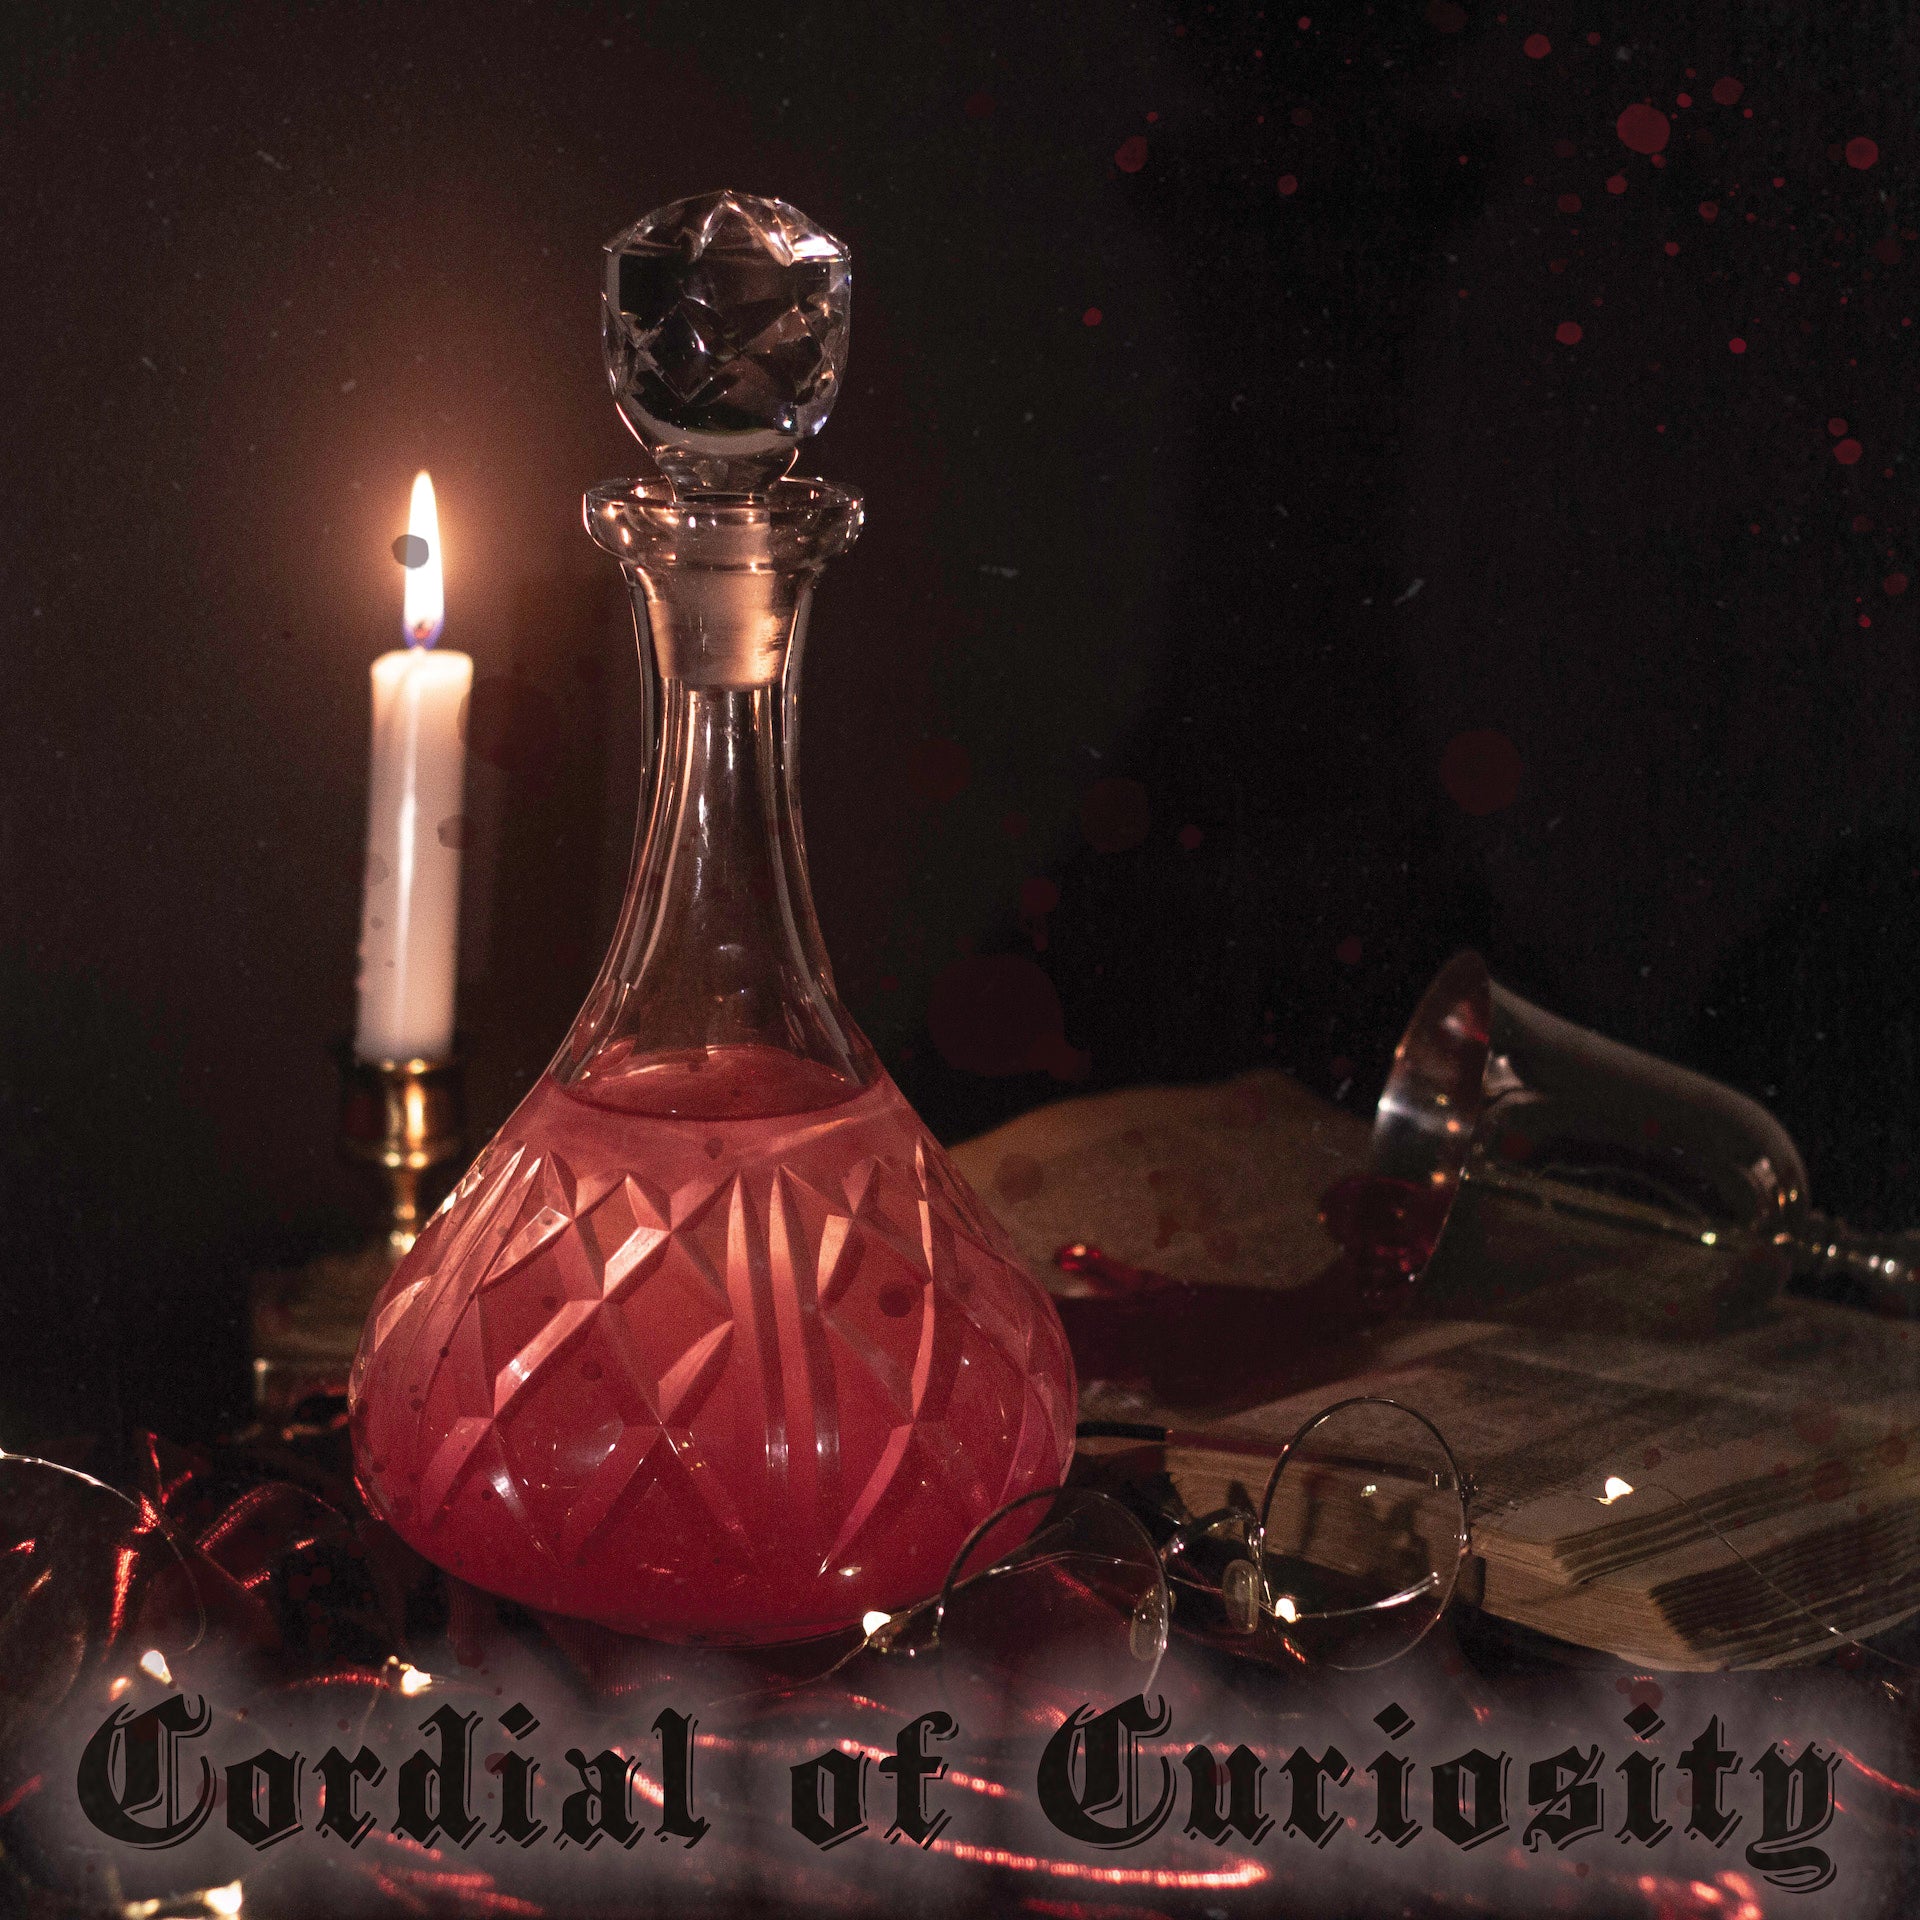 Cordial of Curiosity - Stereoplasm